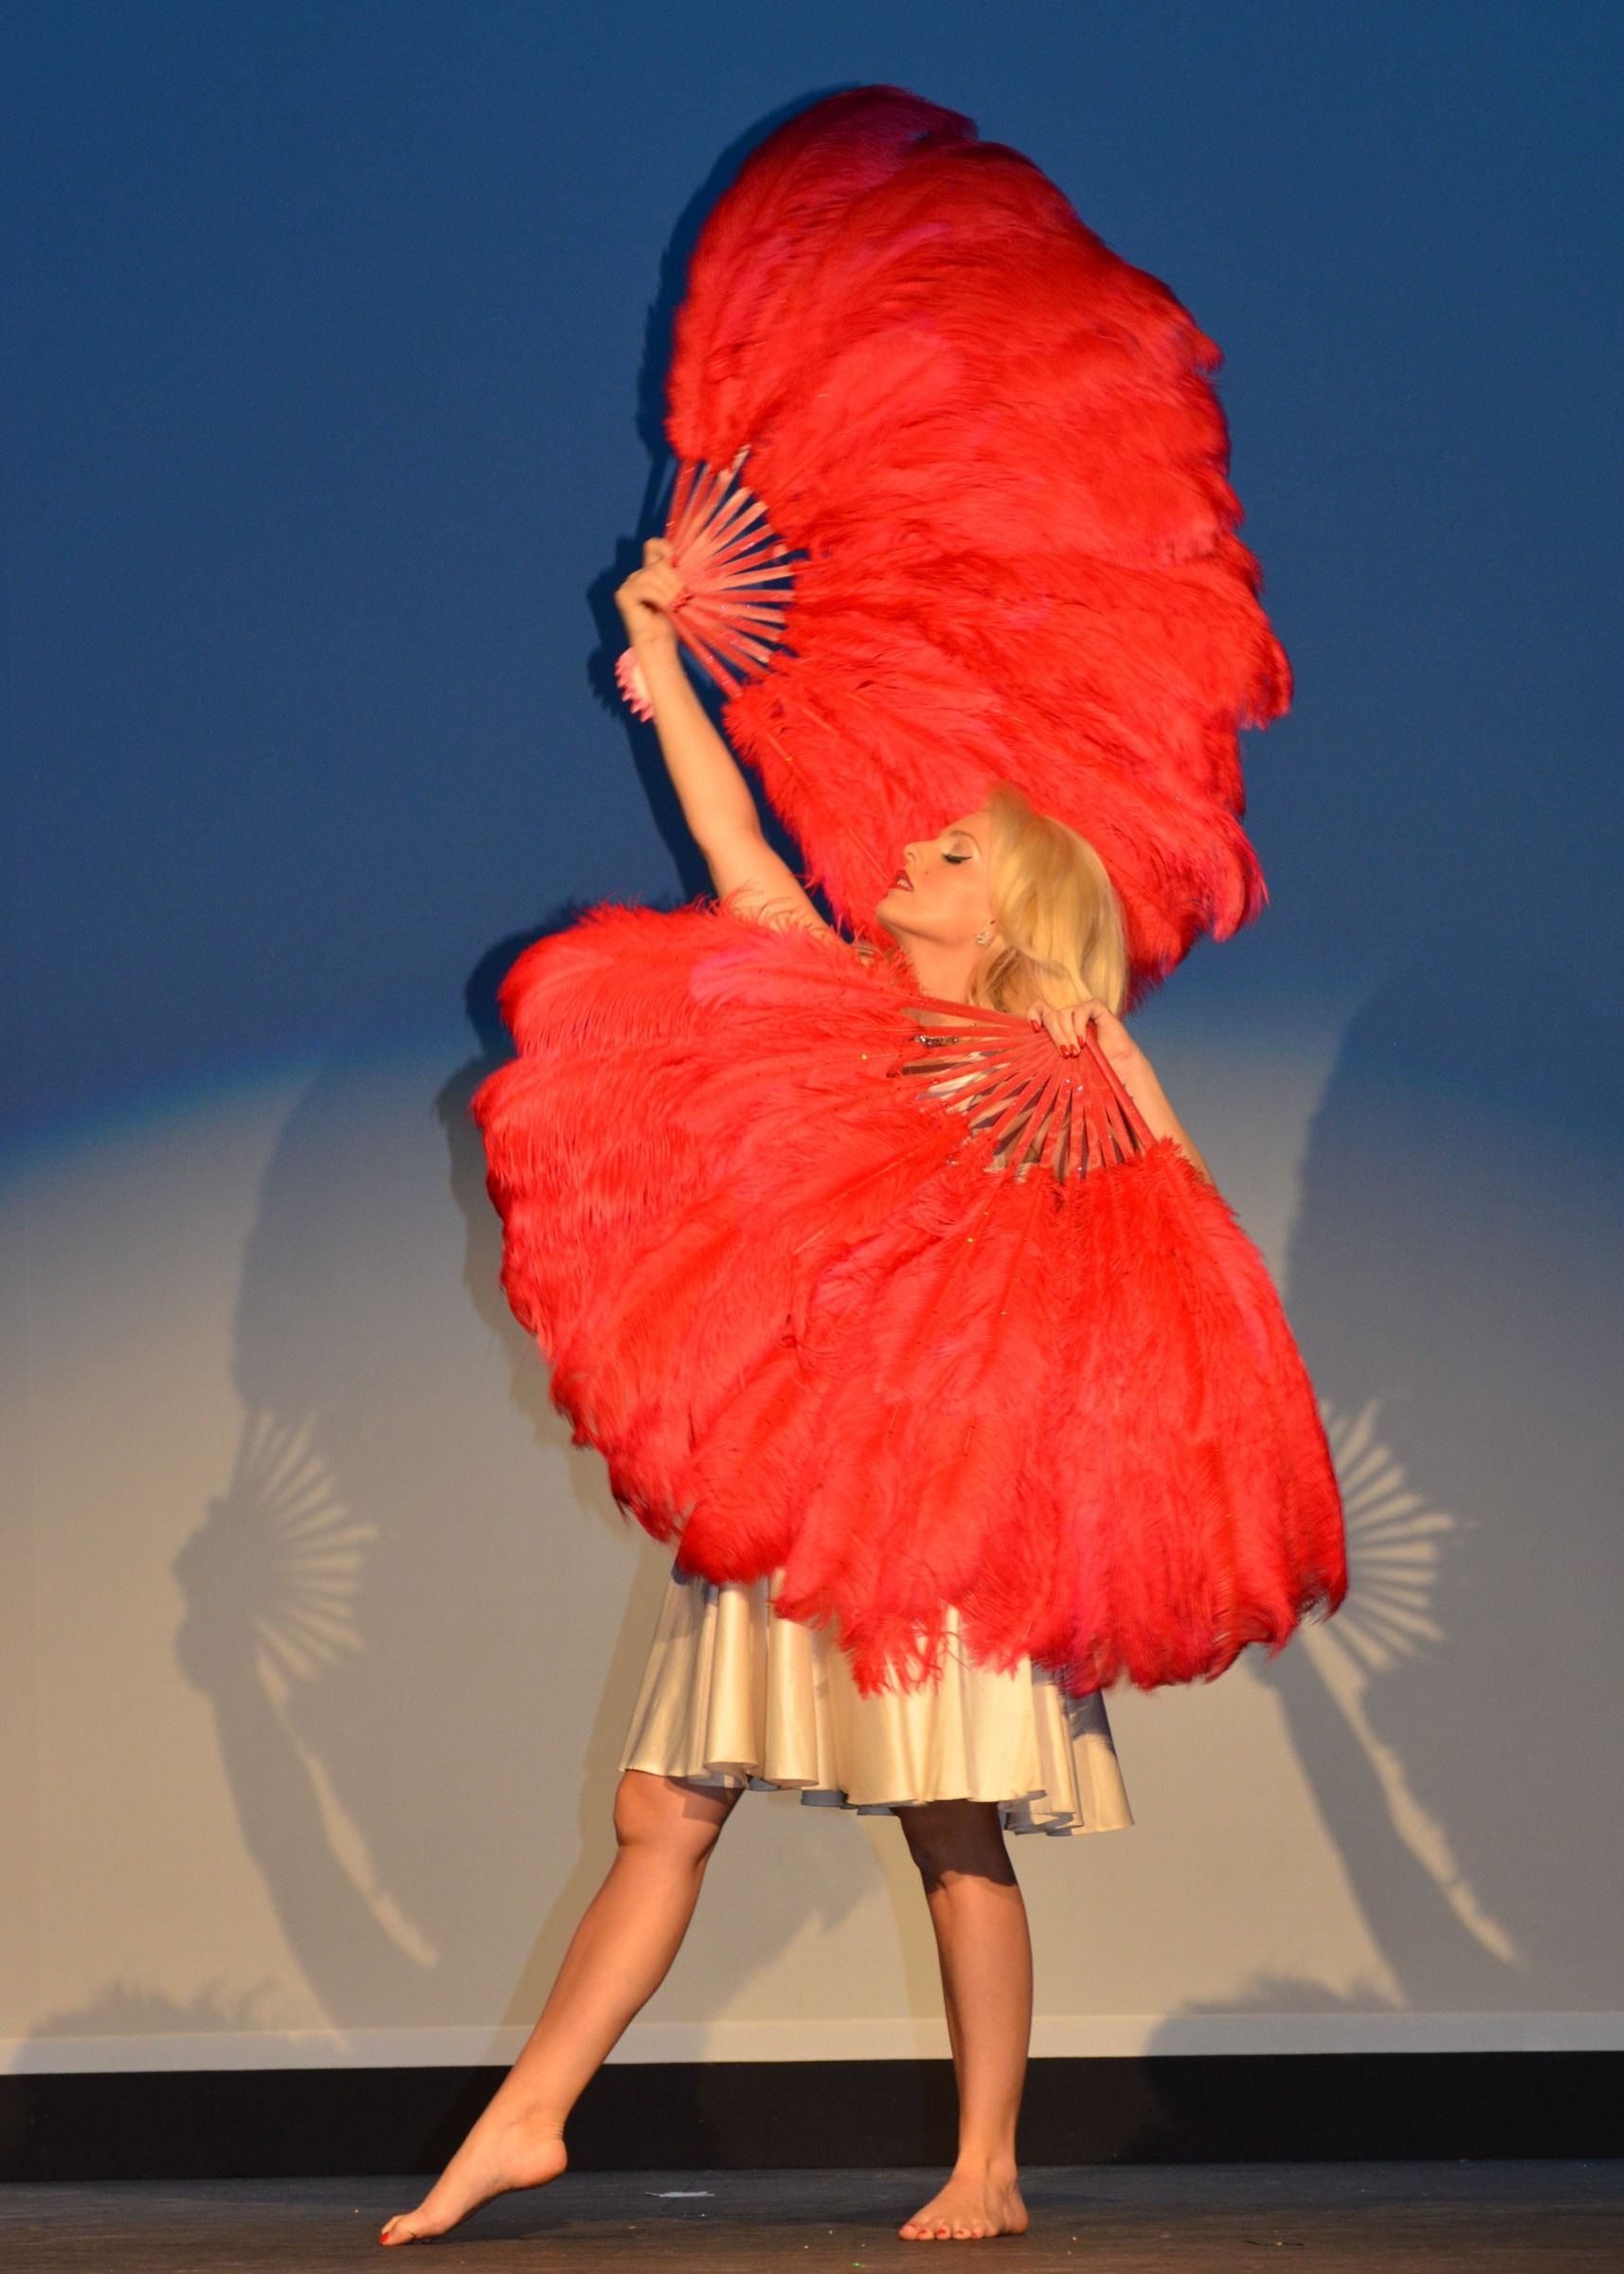 feathered kisses act standing side on holding large red feathered hand fans in front and behind